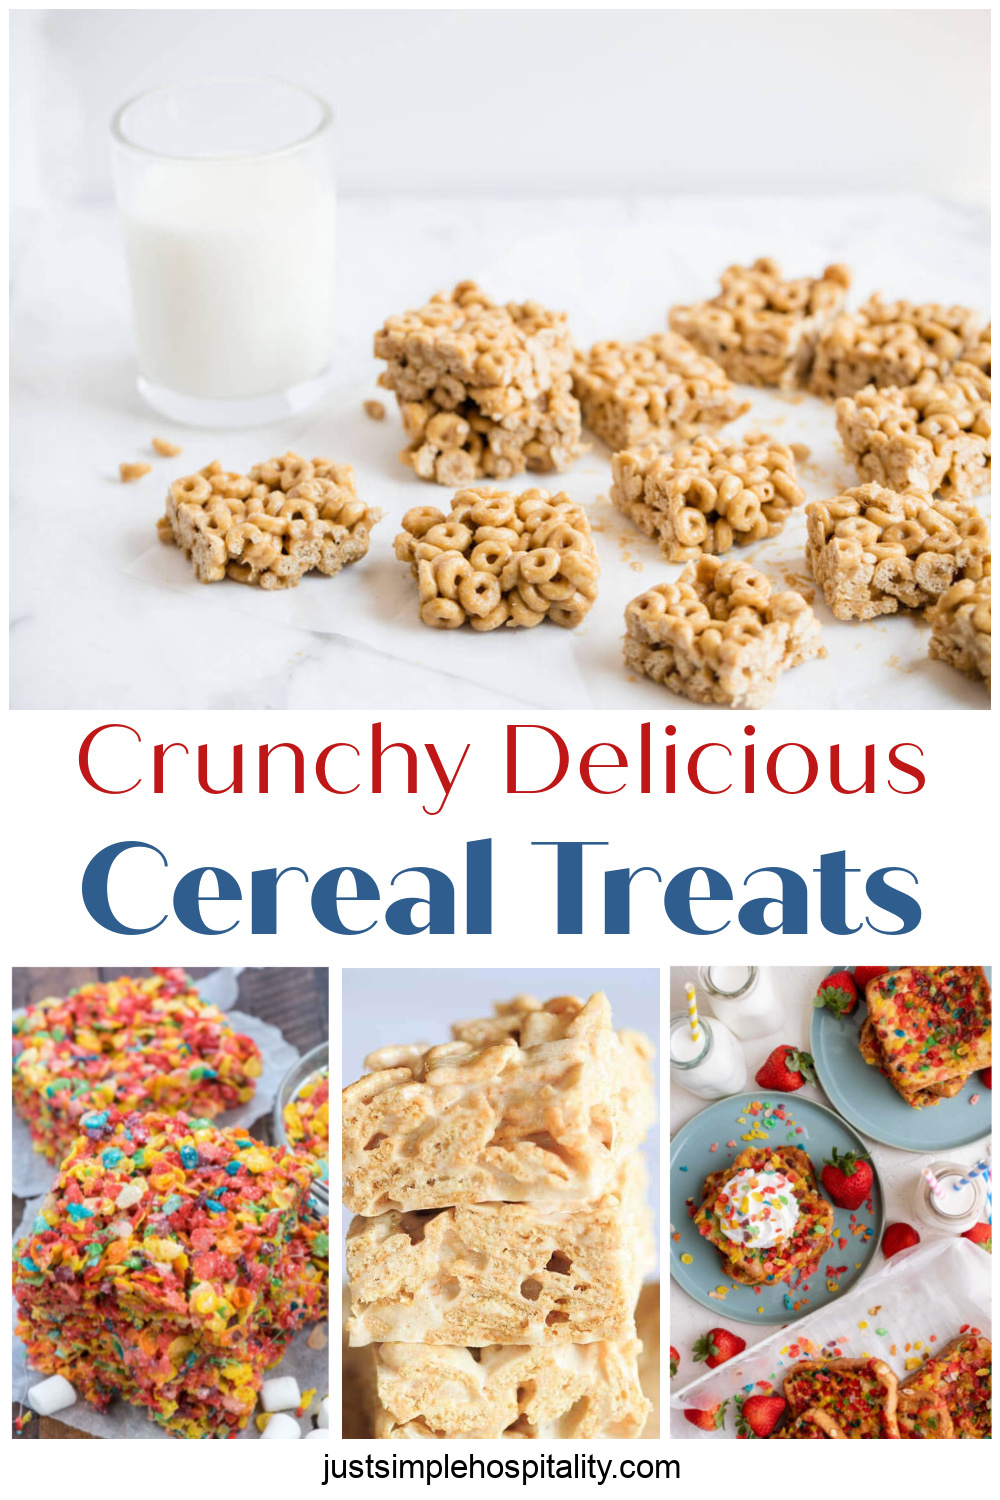 Crunchy Delicious Cereal Treats - Just Simple Hospitality